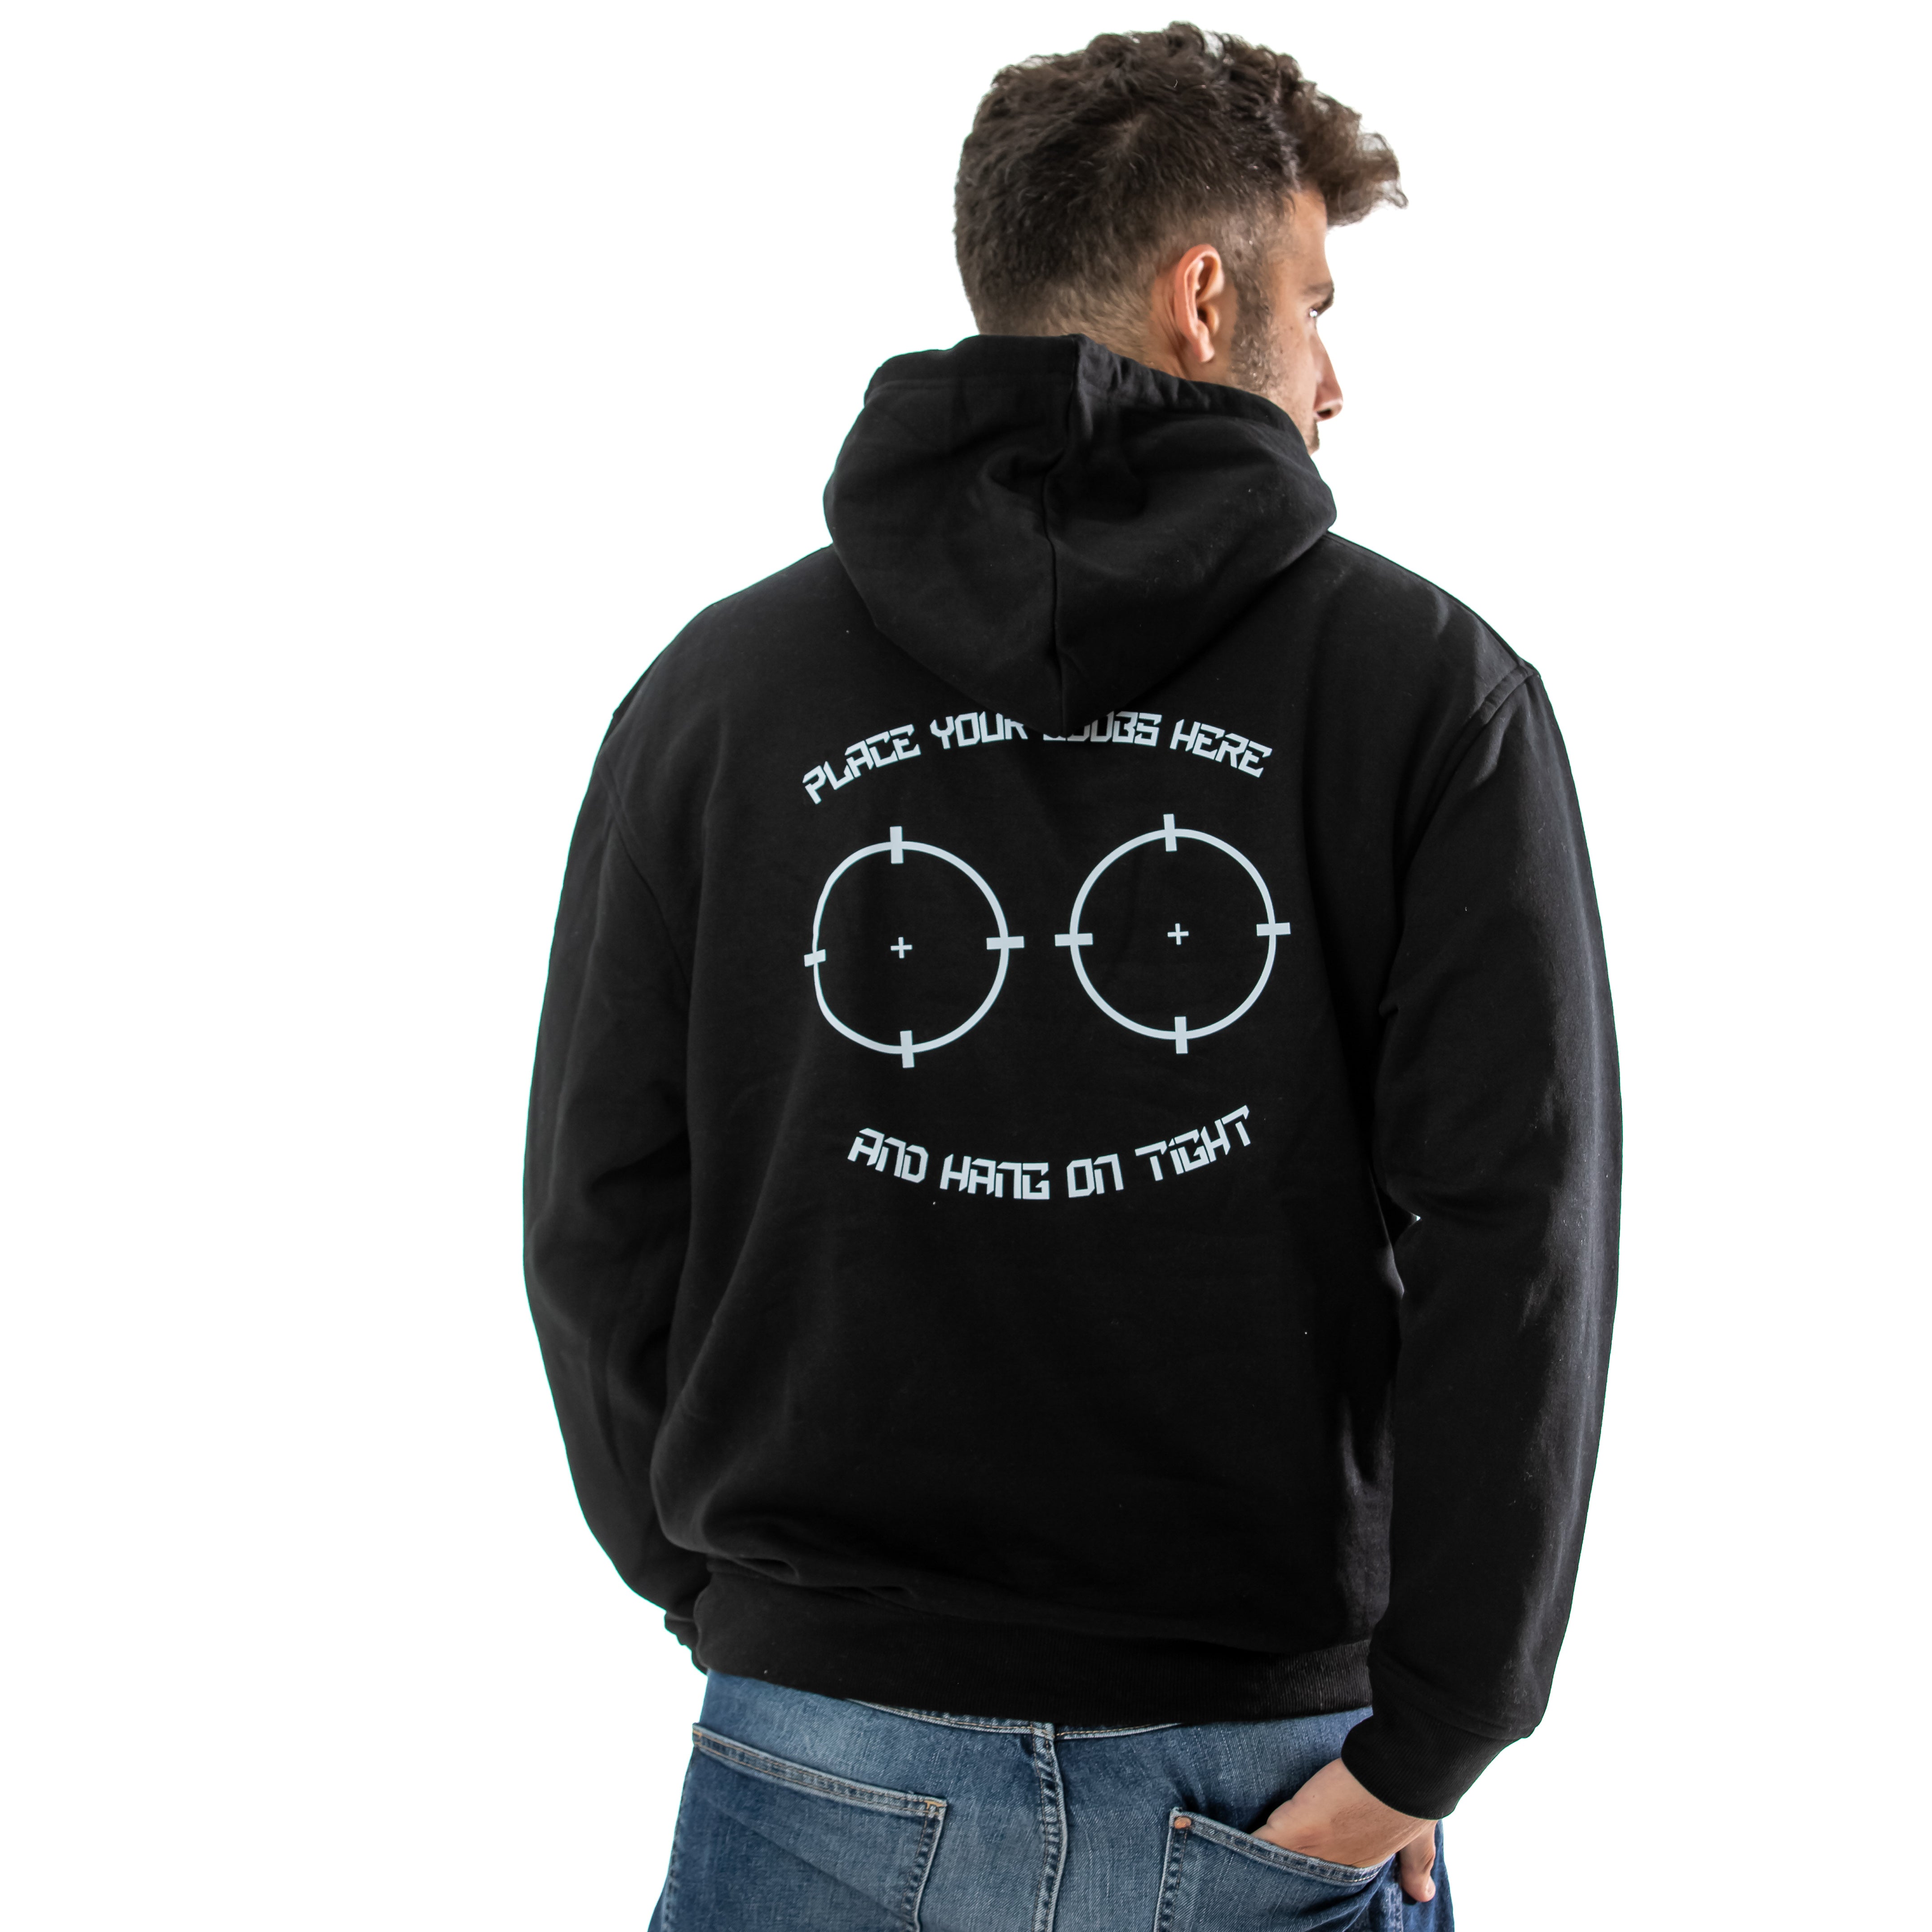 BKMZ - Place your boobs here and hang on tight Hoodie– bikemaze